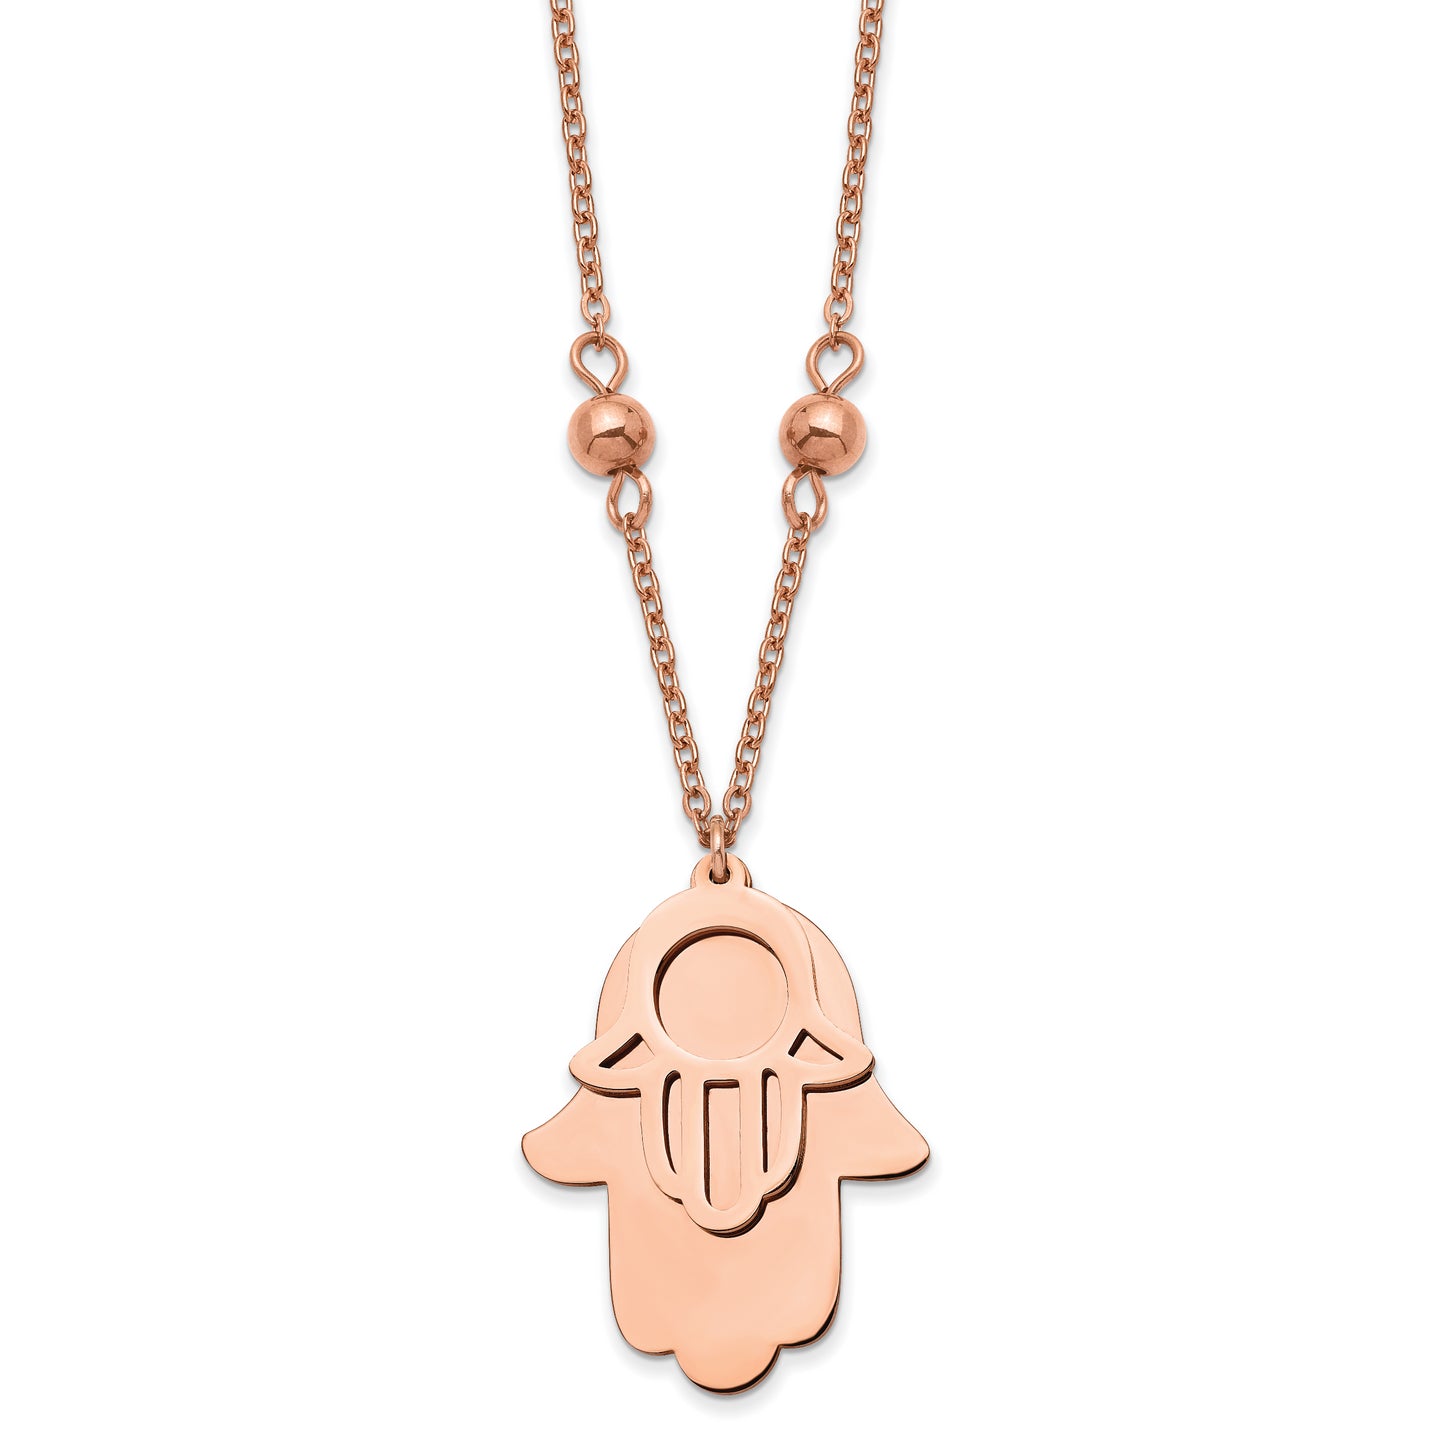 Chisel Stainless Steel Polished Rose IP-plated Hamsa Pendant on a 19.75 inch Beaded Cable Chain Necklace